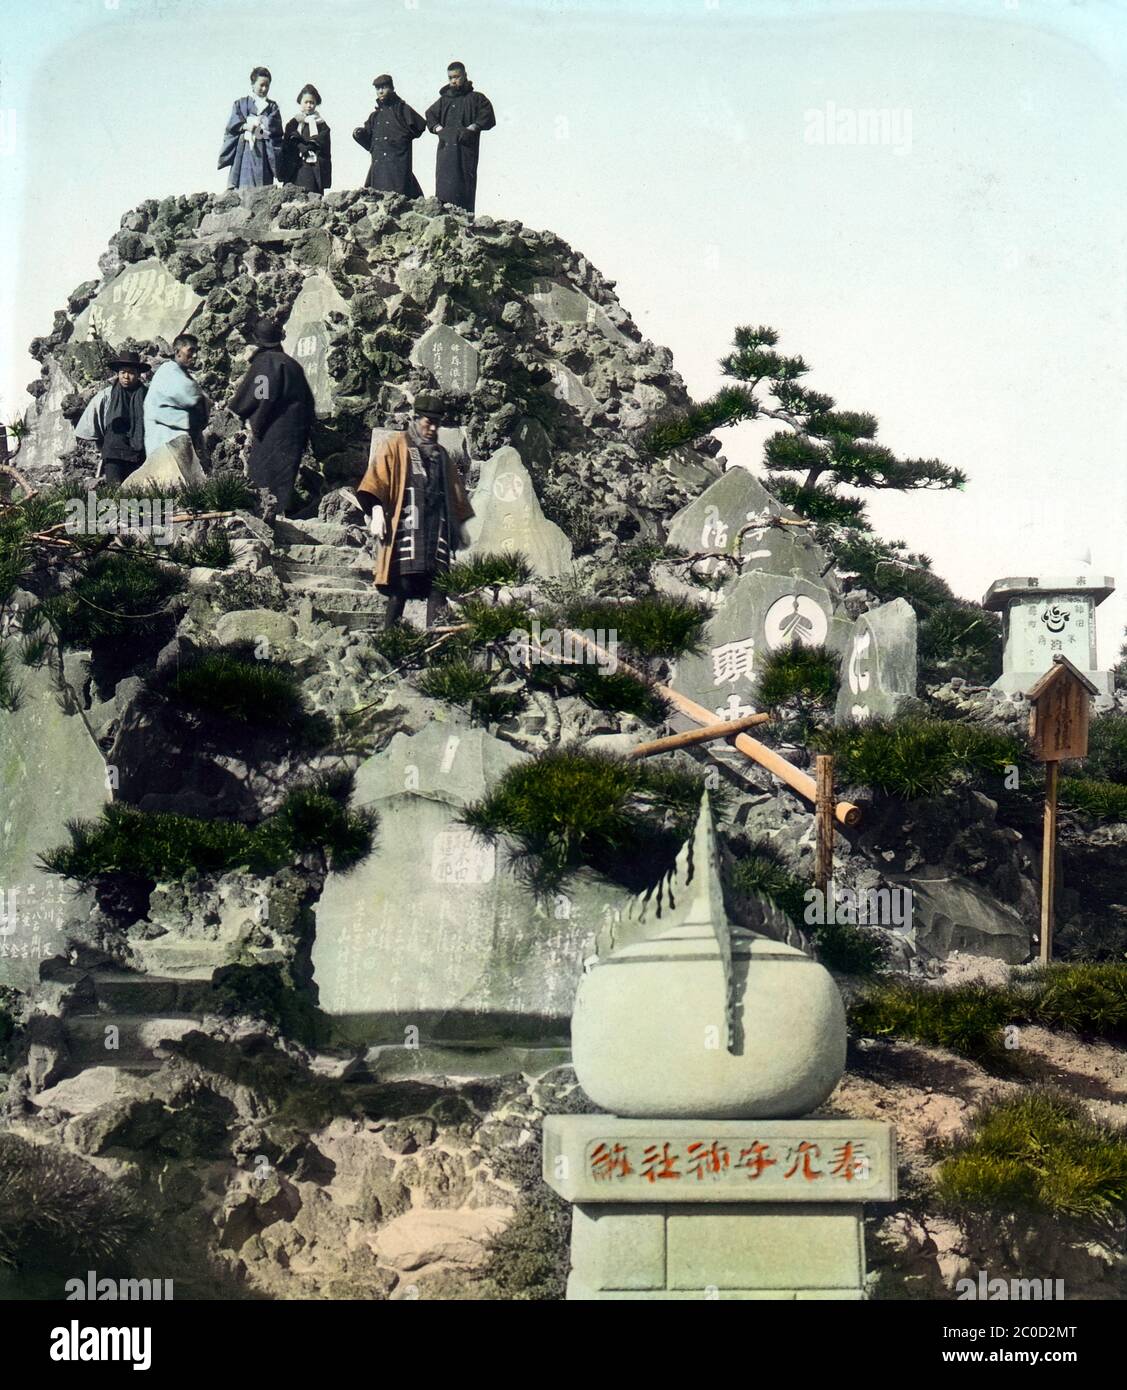 [ 1900s Japan - Worshippers at Japanese Shrine ] — A mini Mt. Fuji at Anamori Inari Jinja shrine (穴守稲荷神社) in Haneda, Tokyo.  The shrine still exists and is popular with pregnant women and parents.  20th century vintage glass slide. Stock Photo